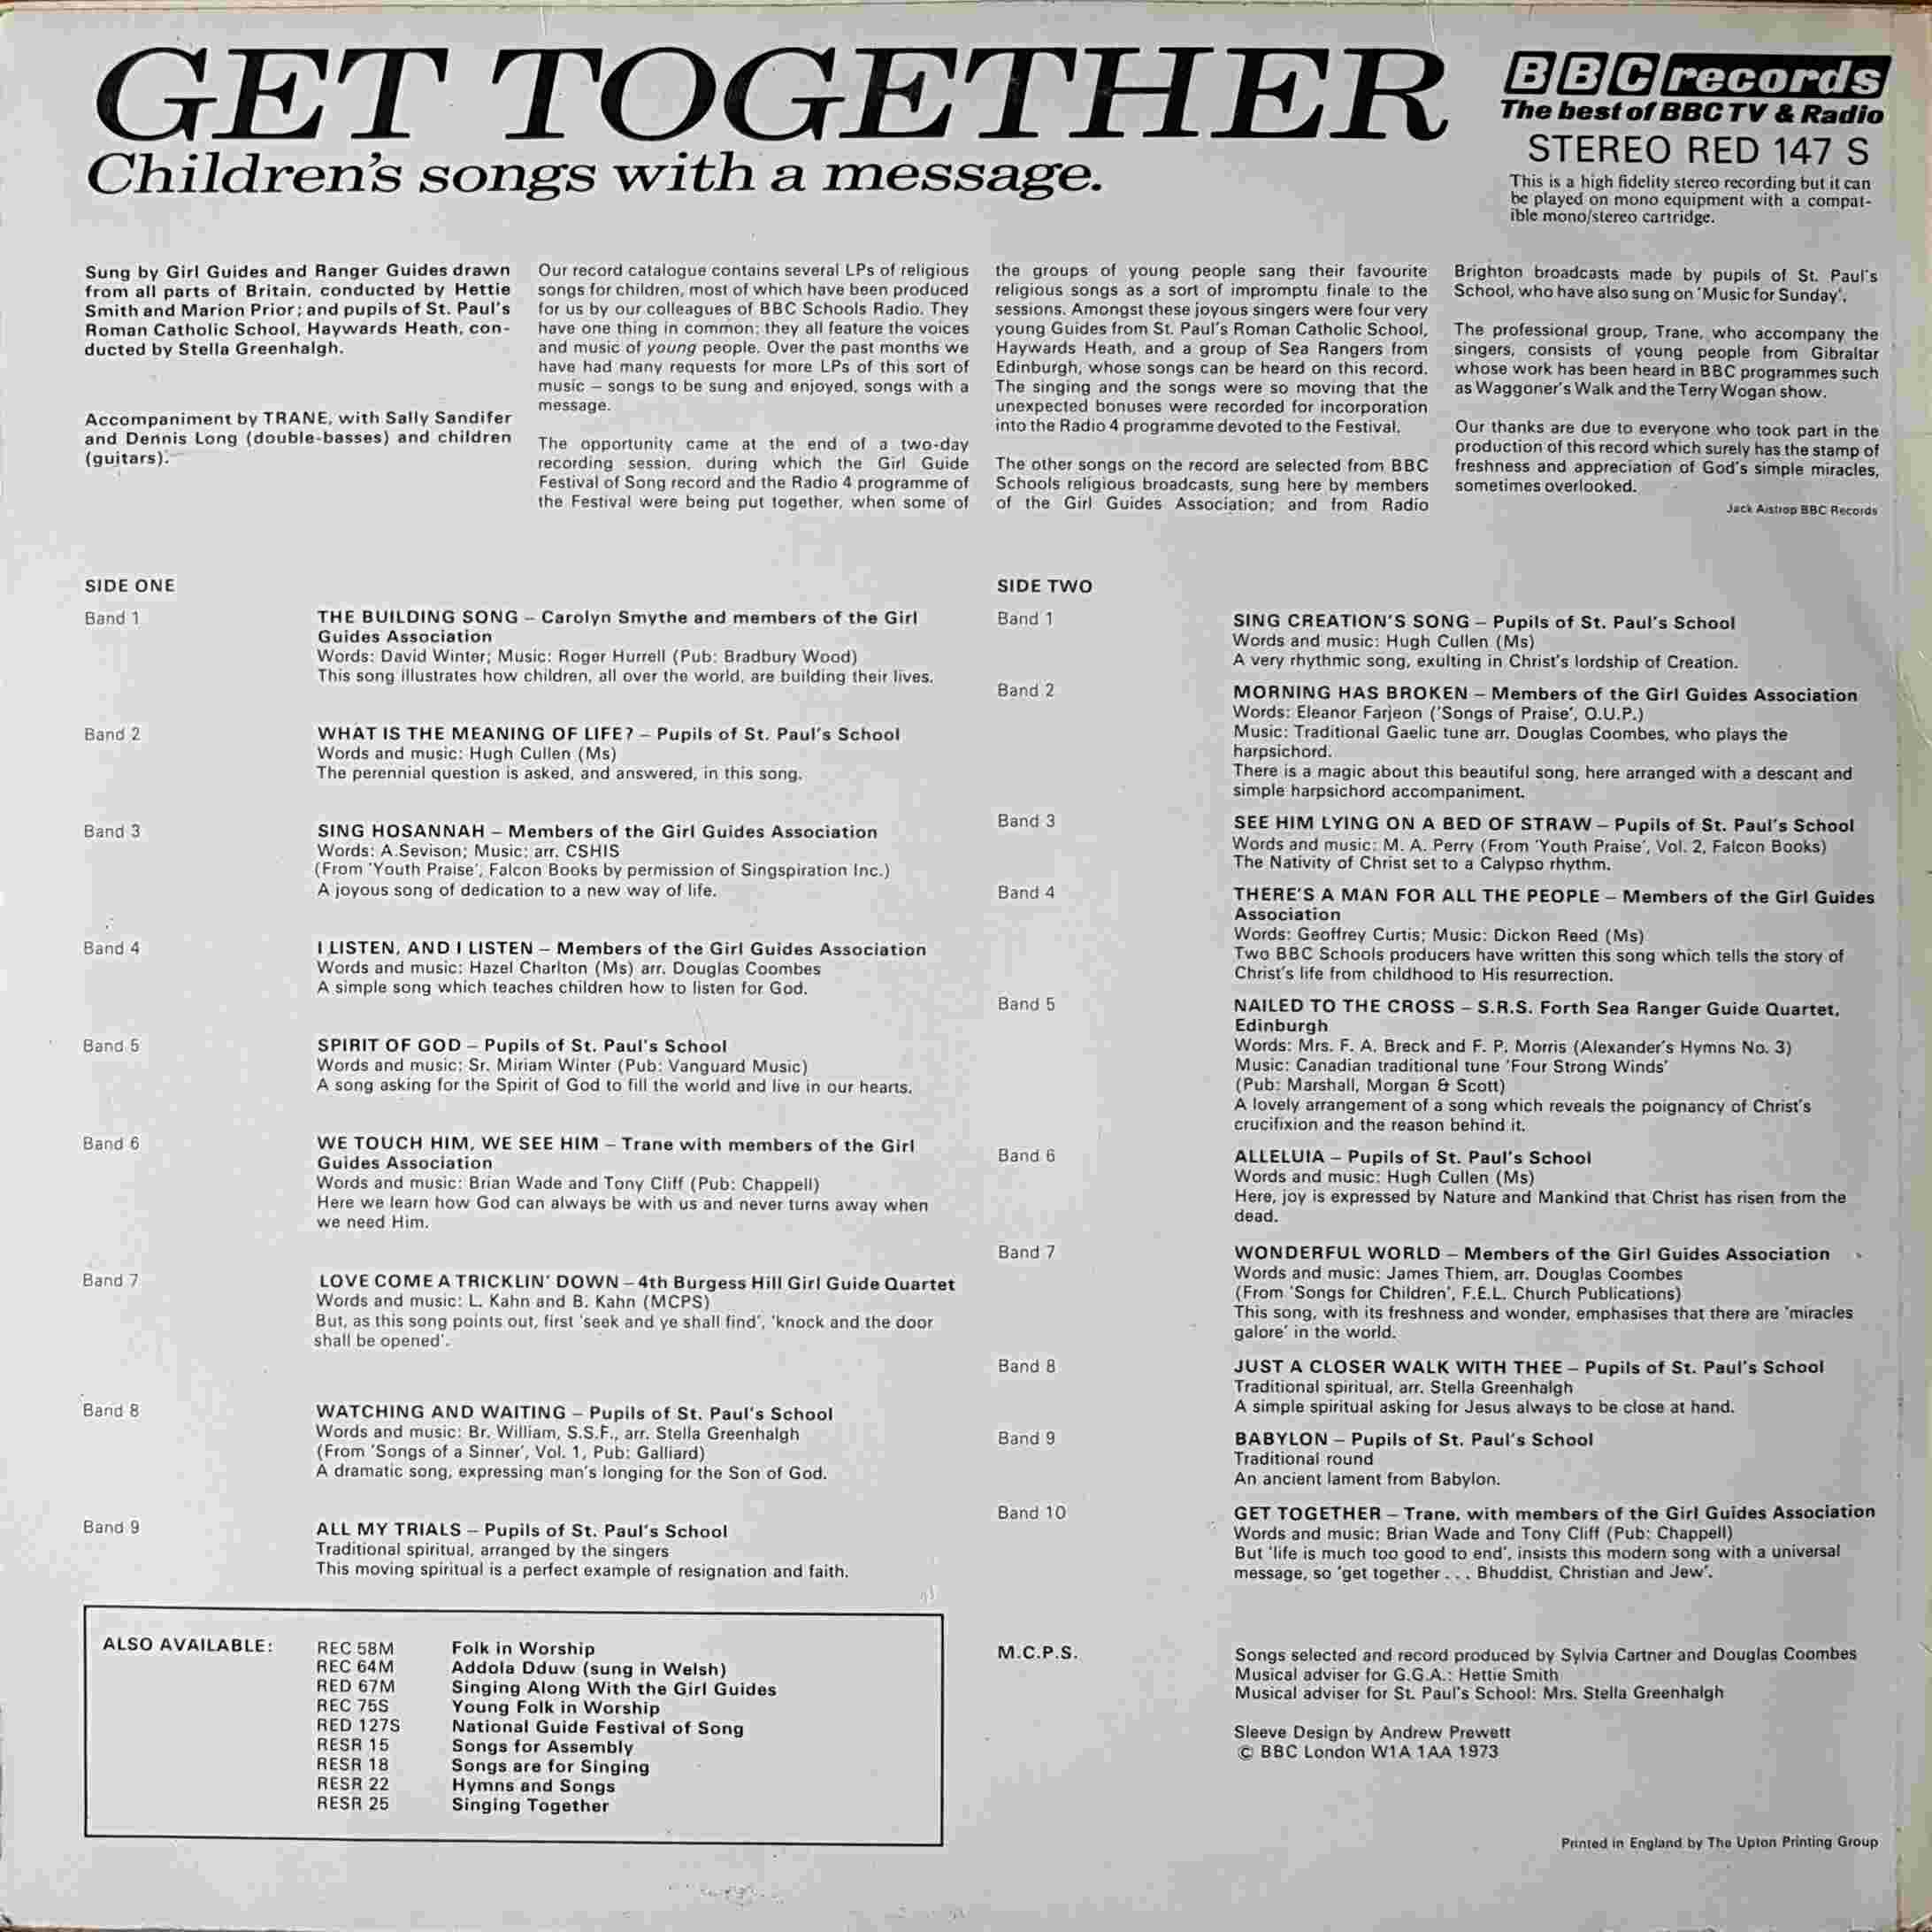 Picture of RED 147 Get together by artist Various from the BBC records and Tapes library